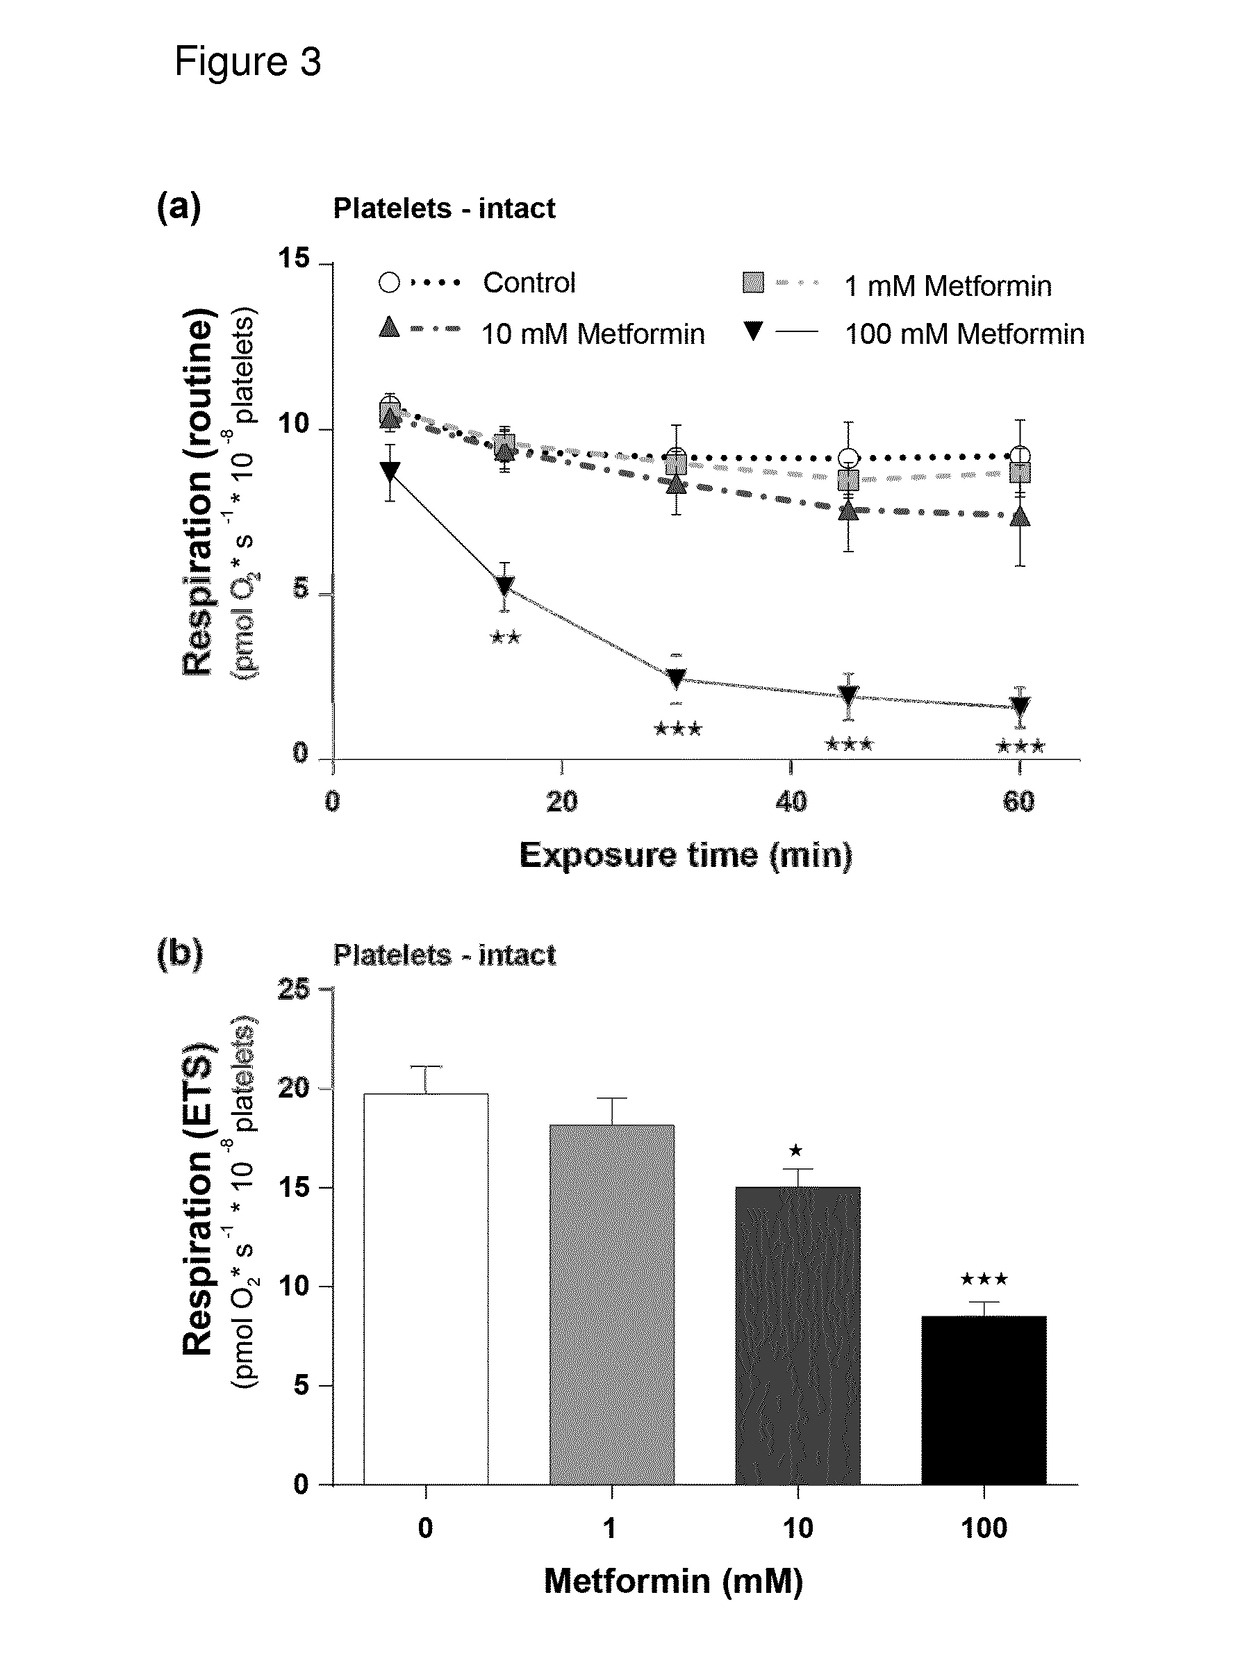 Succinate Prodrugs for Use in the Treatment of Lactic Acidosis or Drug-Induced Side-Effects Due to Complex I-Related Impairment of Mitochondrial Oxidative Phosphorylation